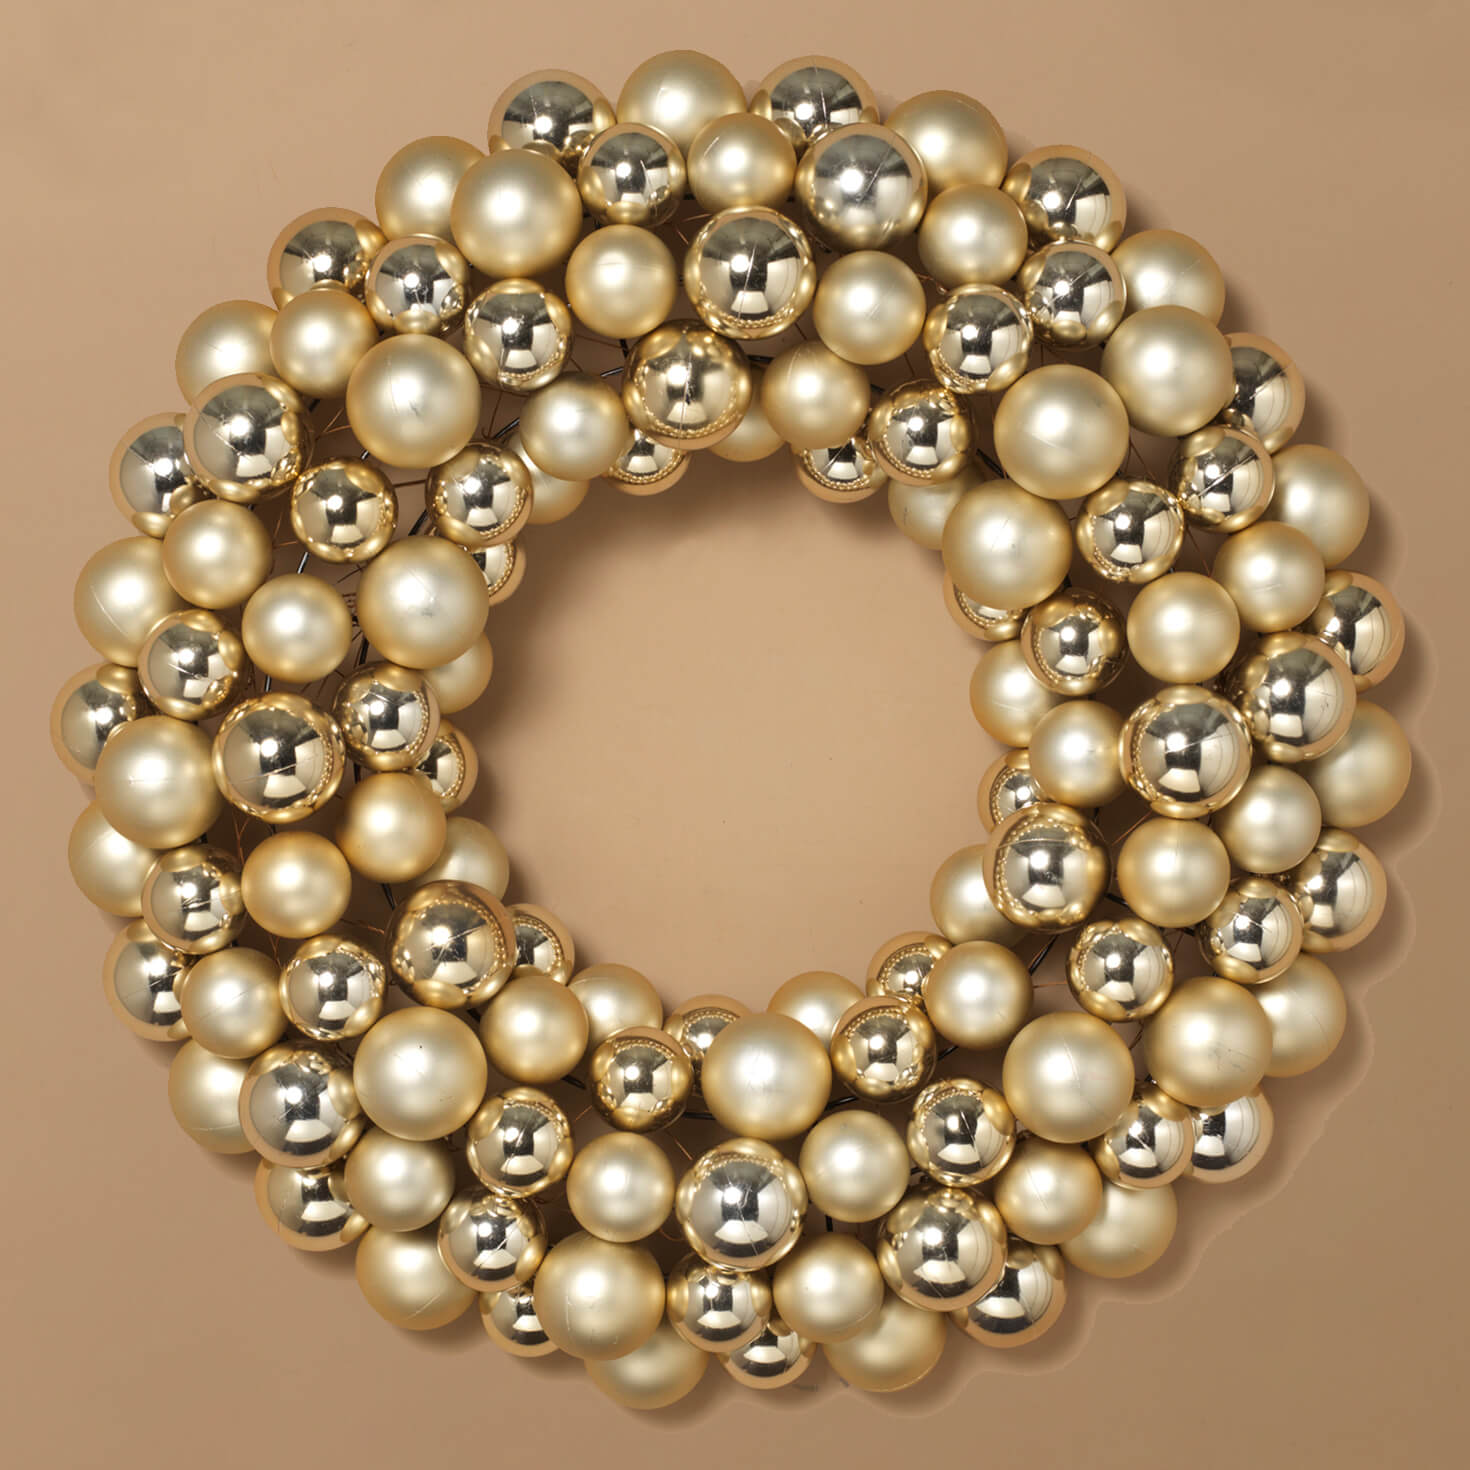 Gold Holiday Shatterproof Ornament Wreath